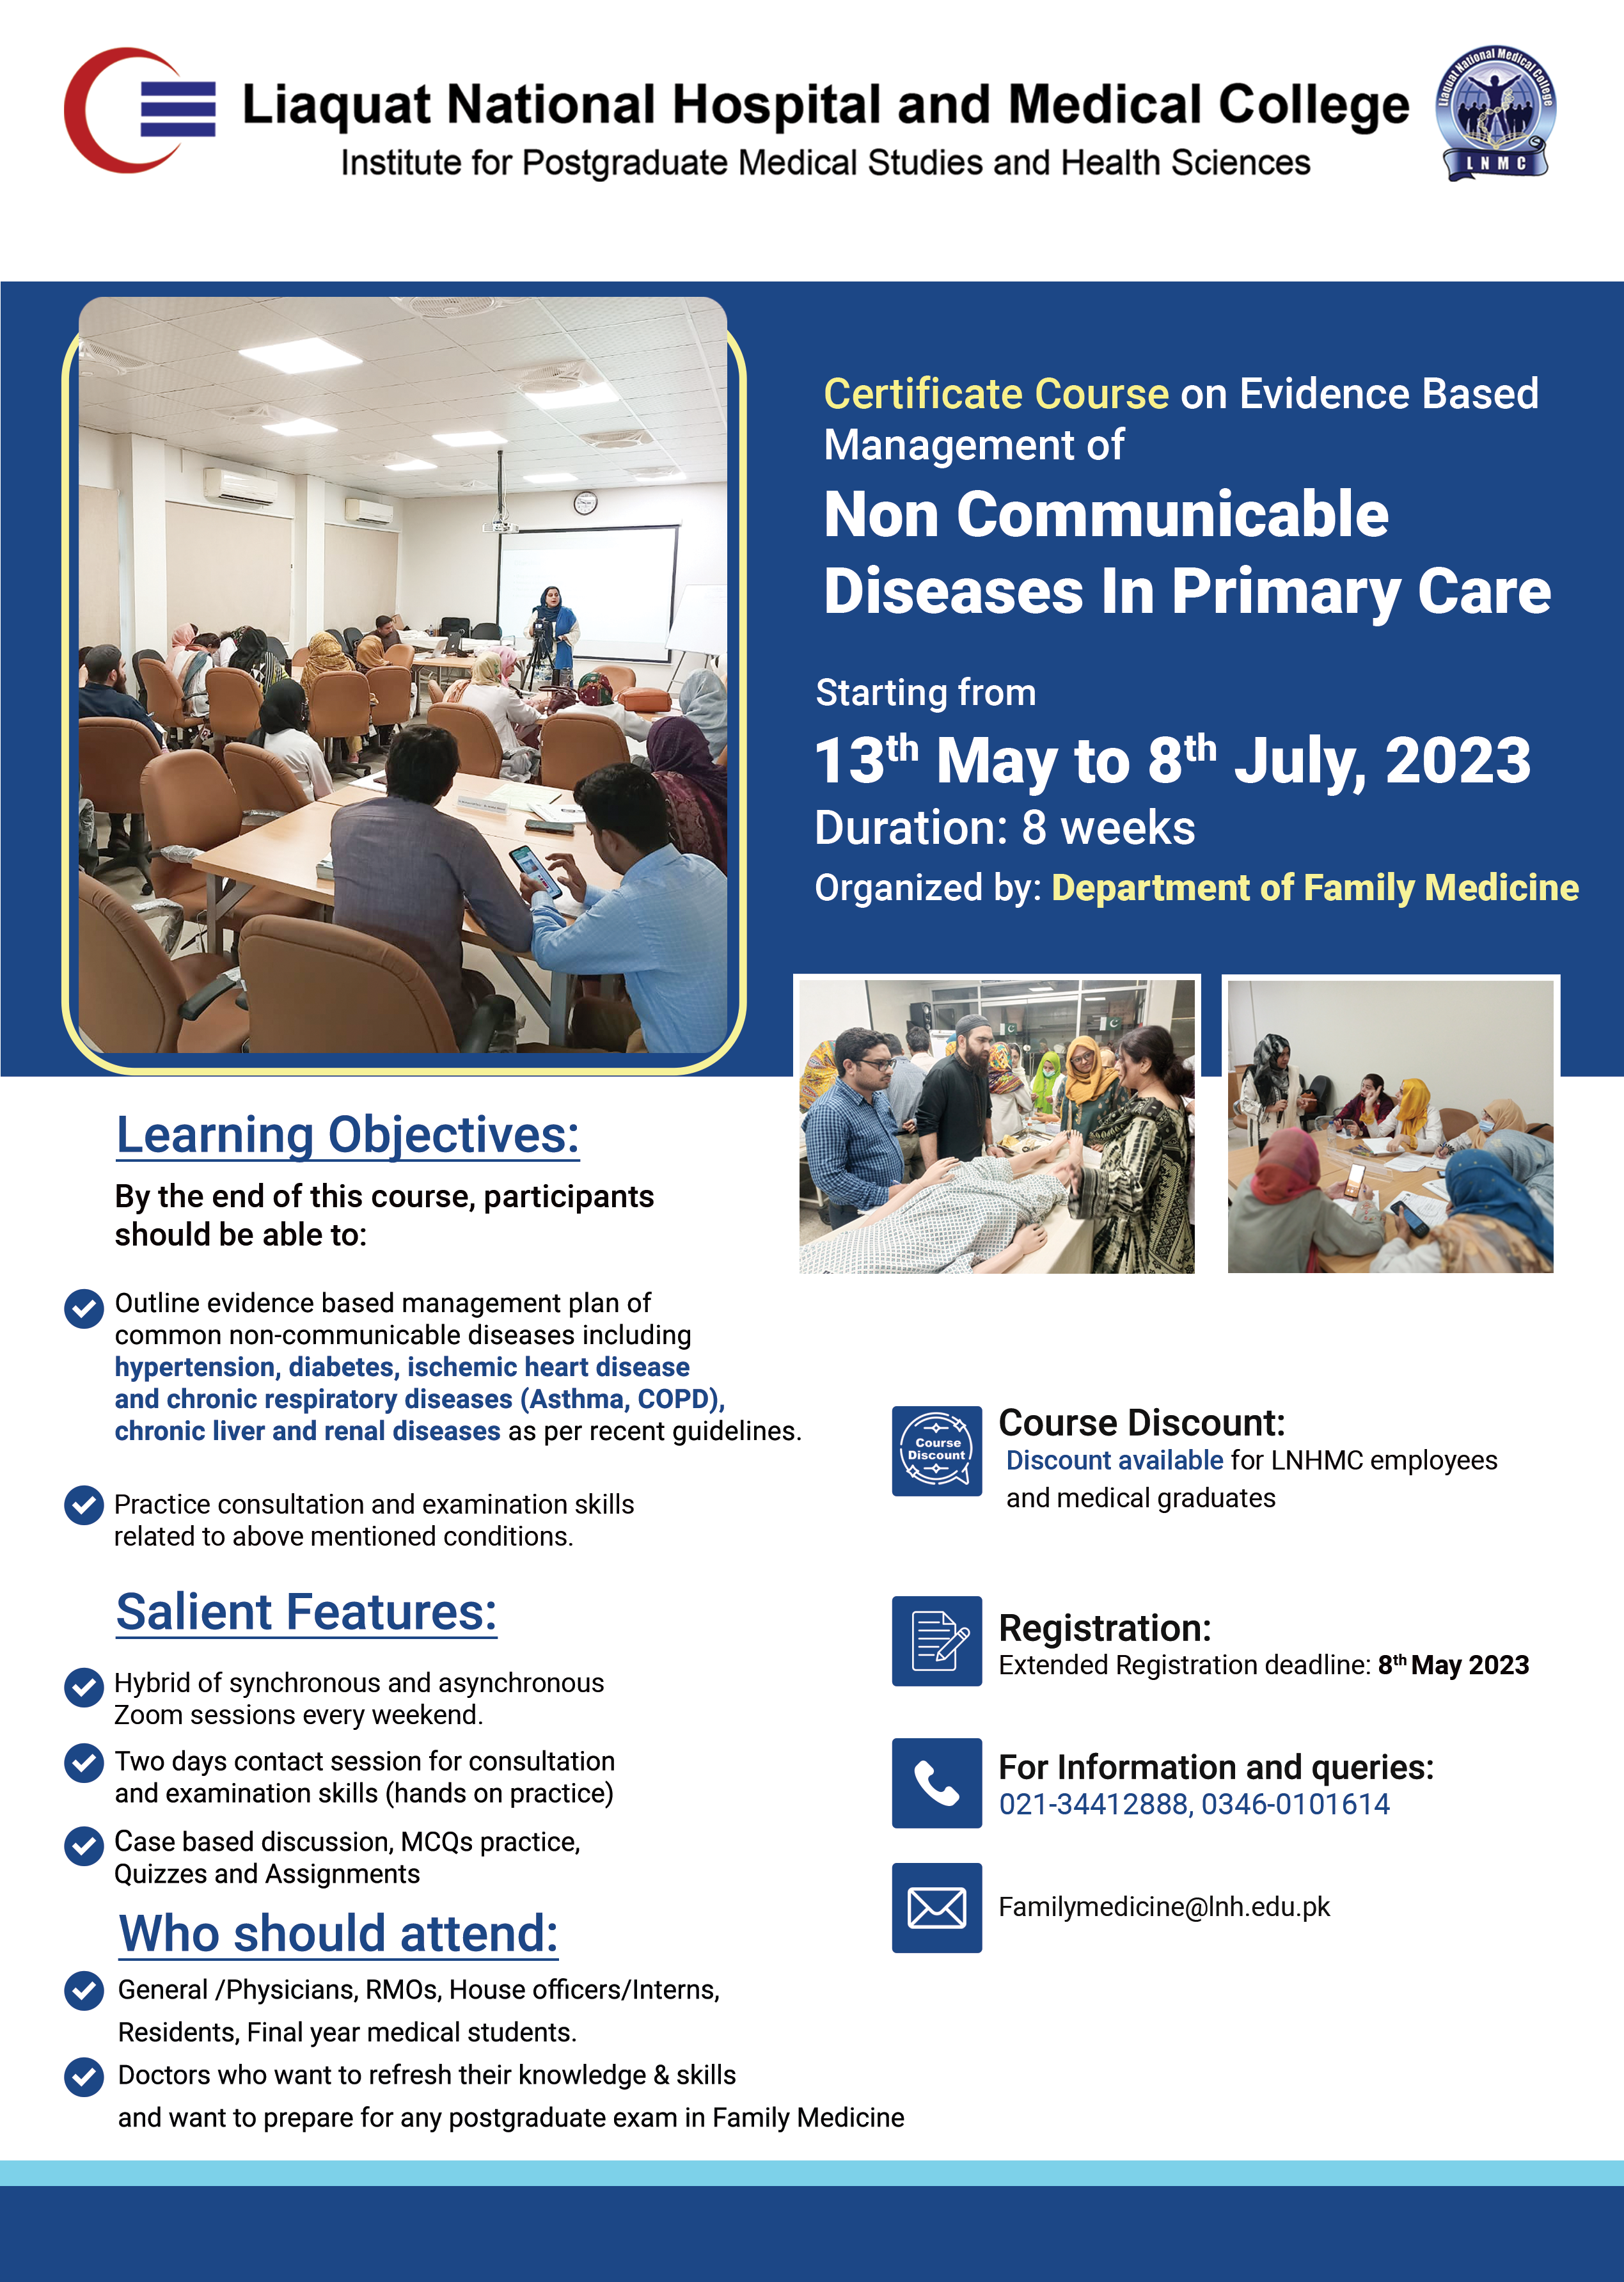 Certificate Course on  Evidence Based Management Of Non-Communicable Diseases In Primary Care